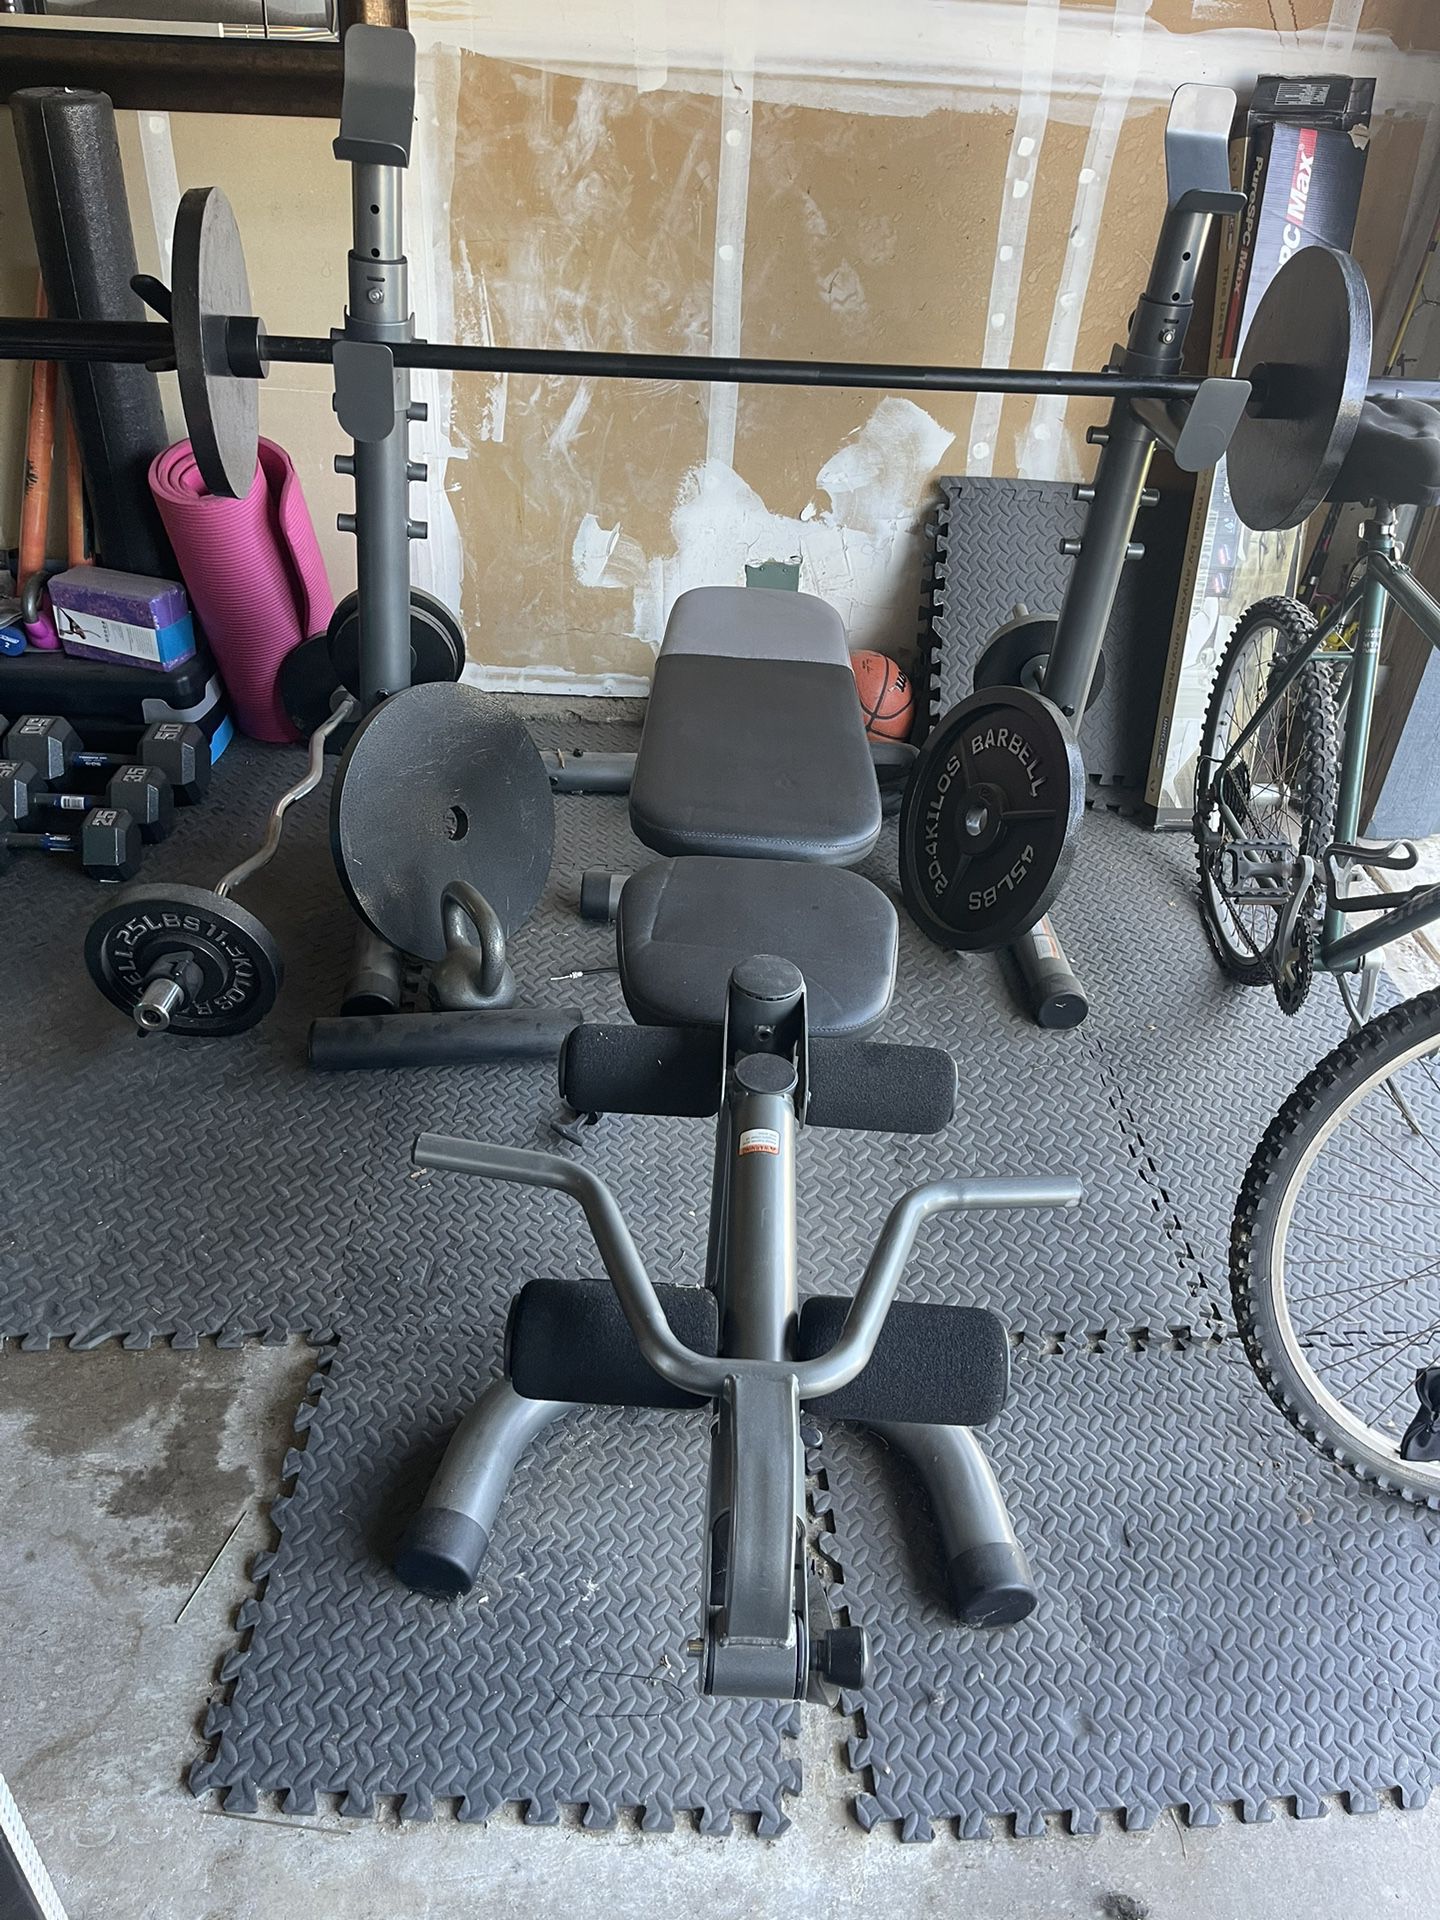 Heavy Duty Bench & Weights For Sale OBO (Only Selling Complete Set)